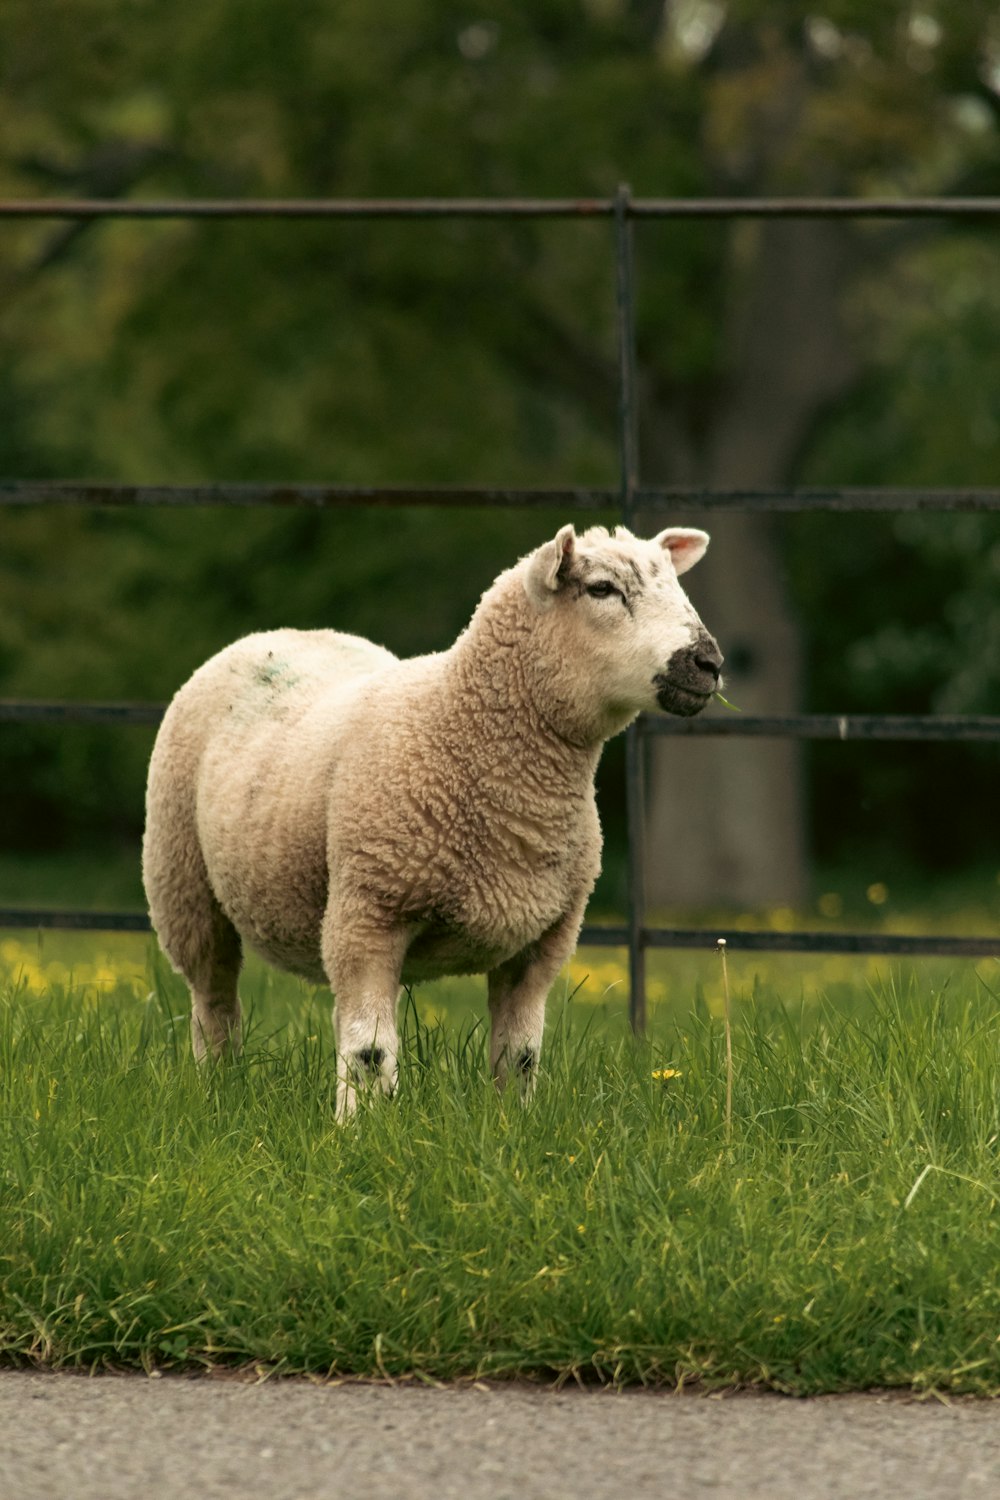 a sheep standing in the grass near a fence